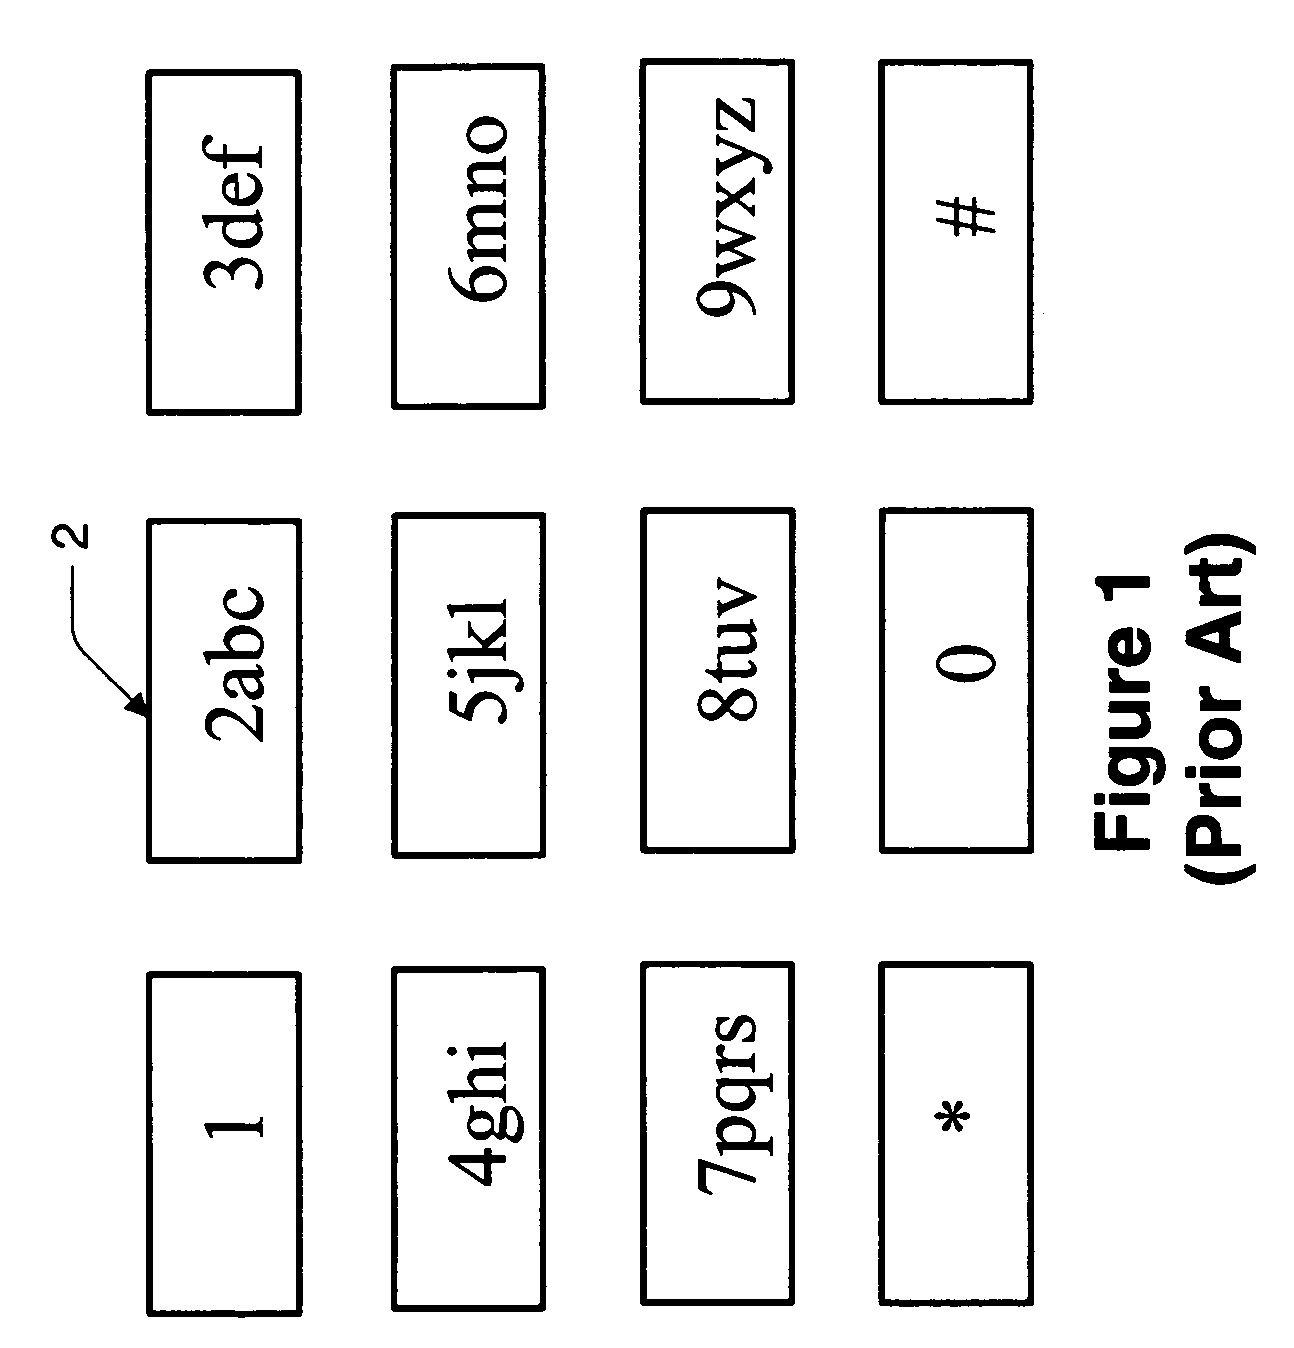 Form factor and input method for language input